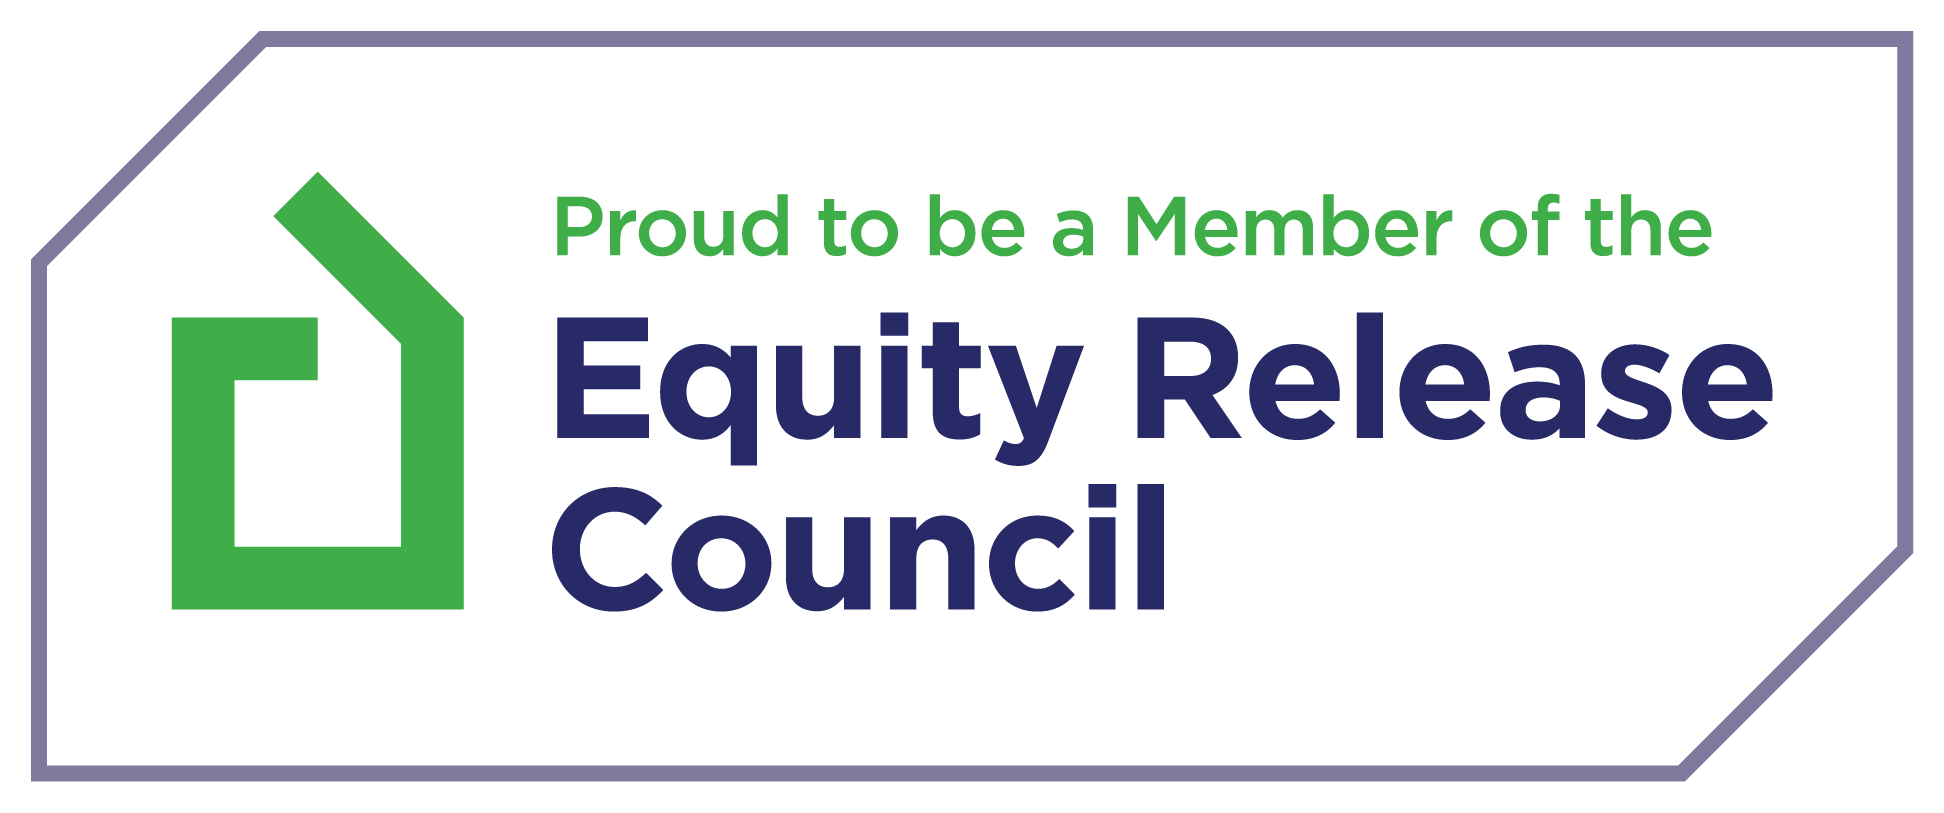 Kevin Woods is a member of the Equity Release Council